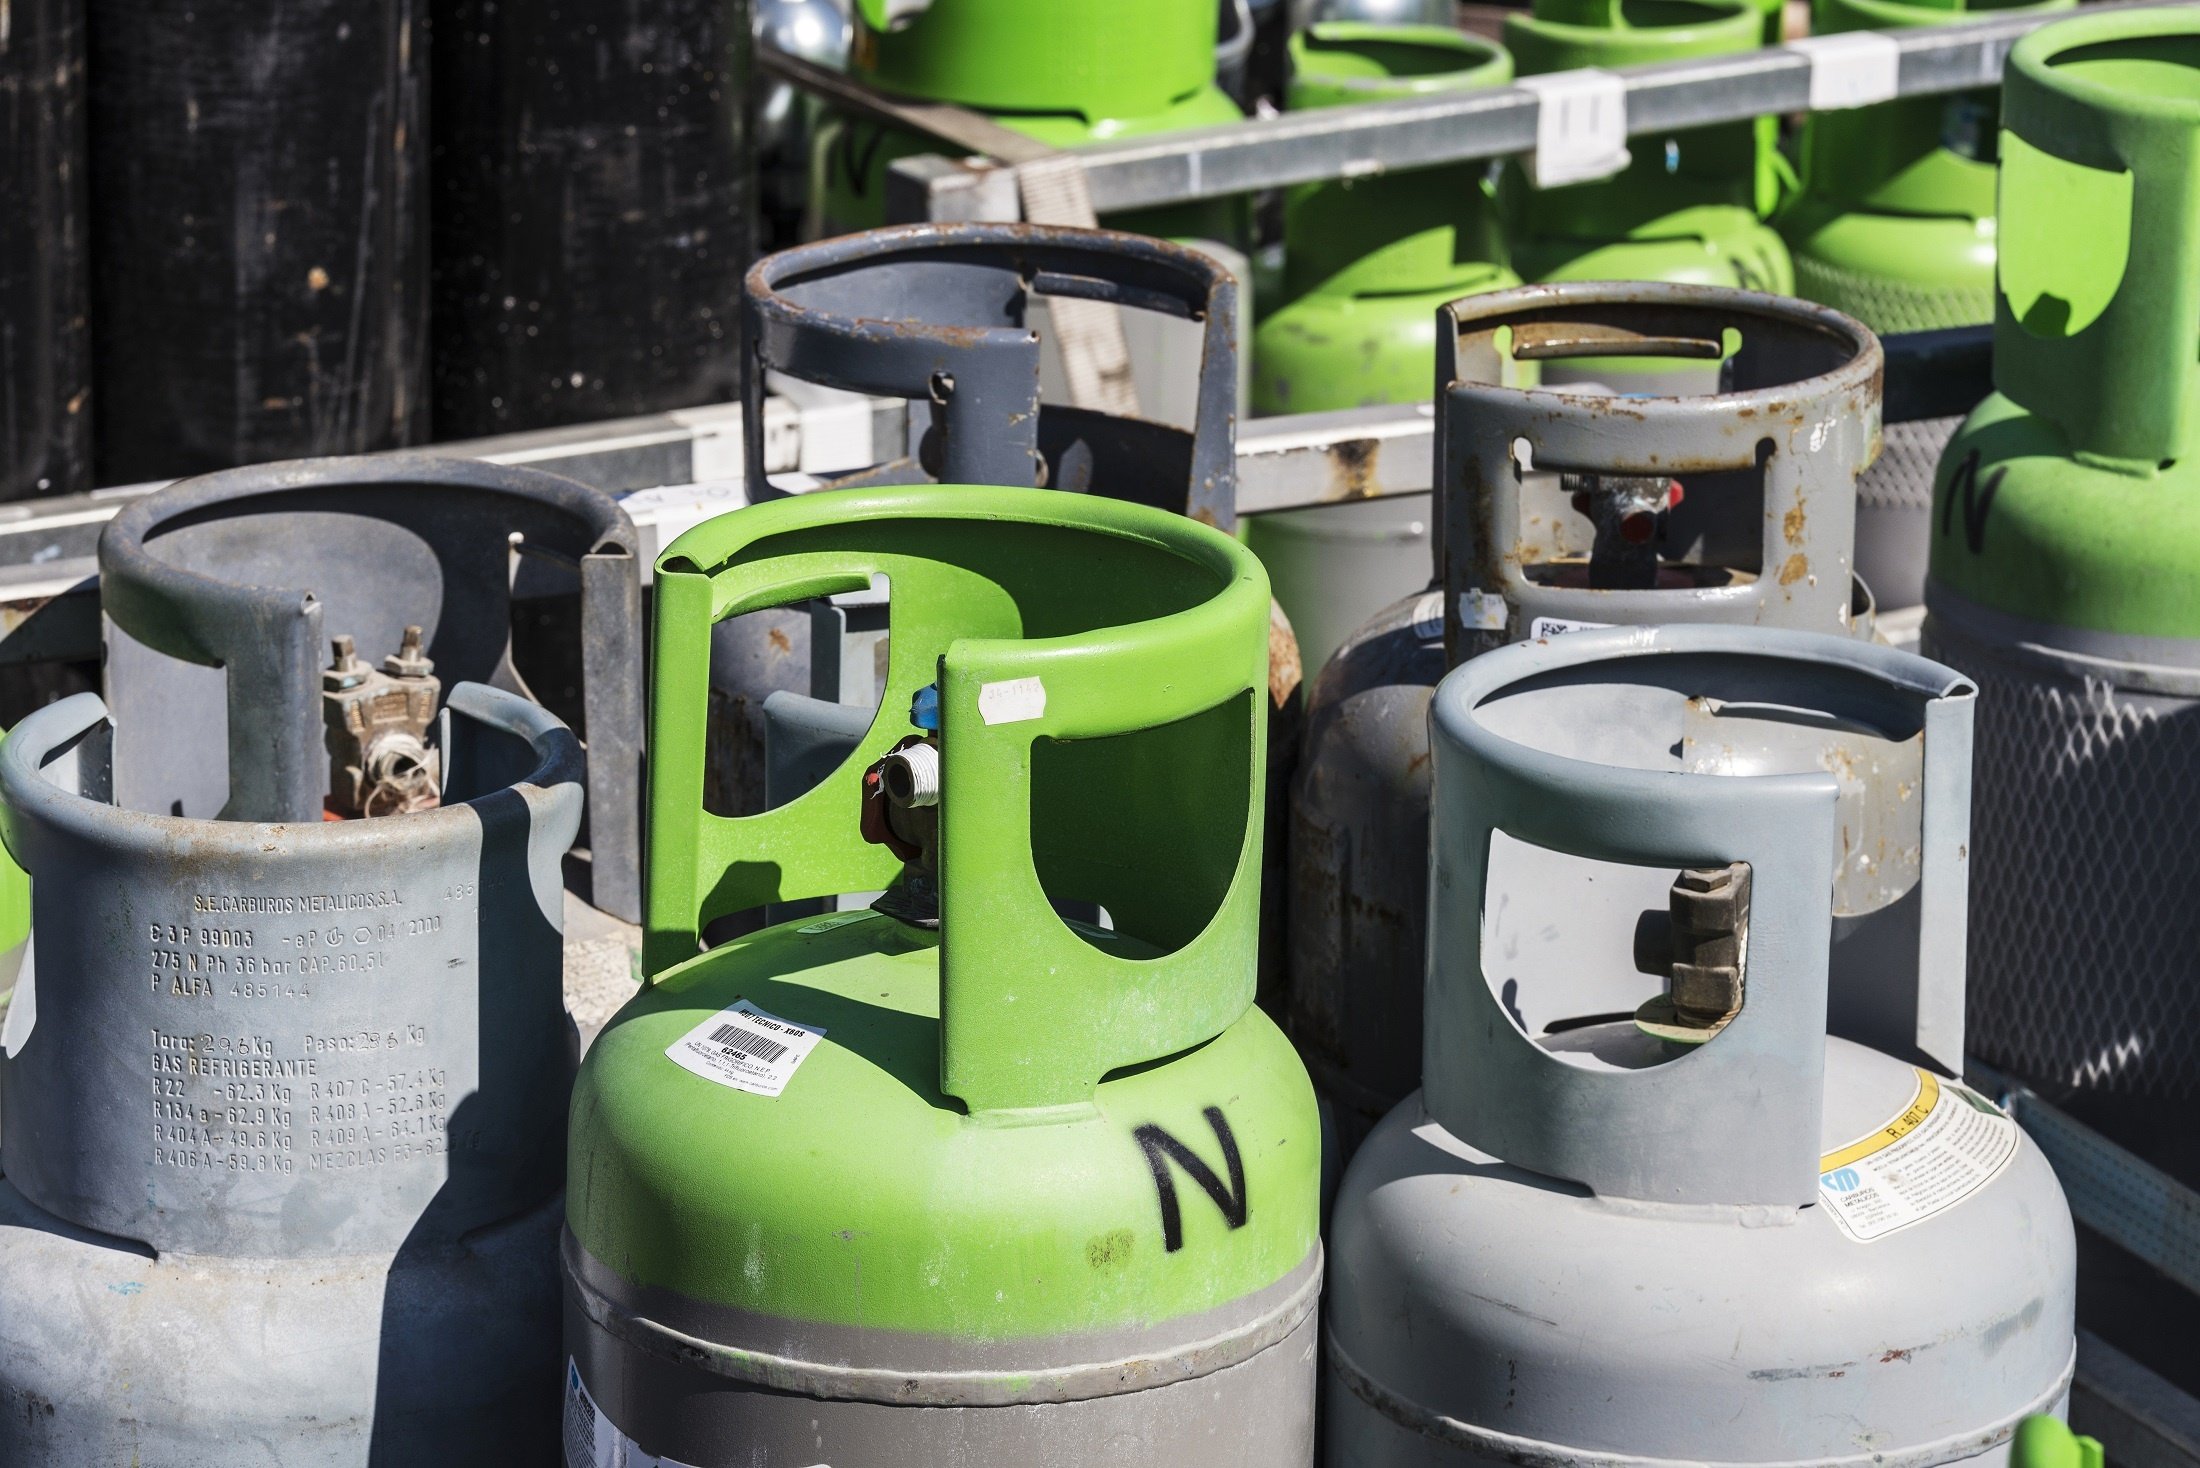 Are you Storing Your Compressed Gas Cylinders Safely? - Safety